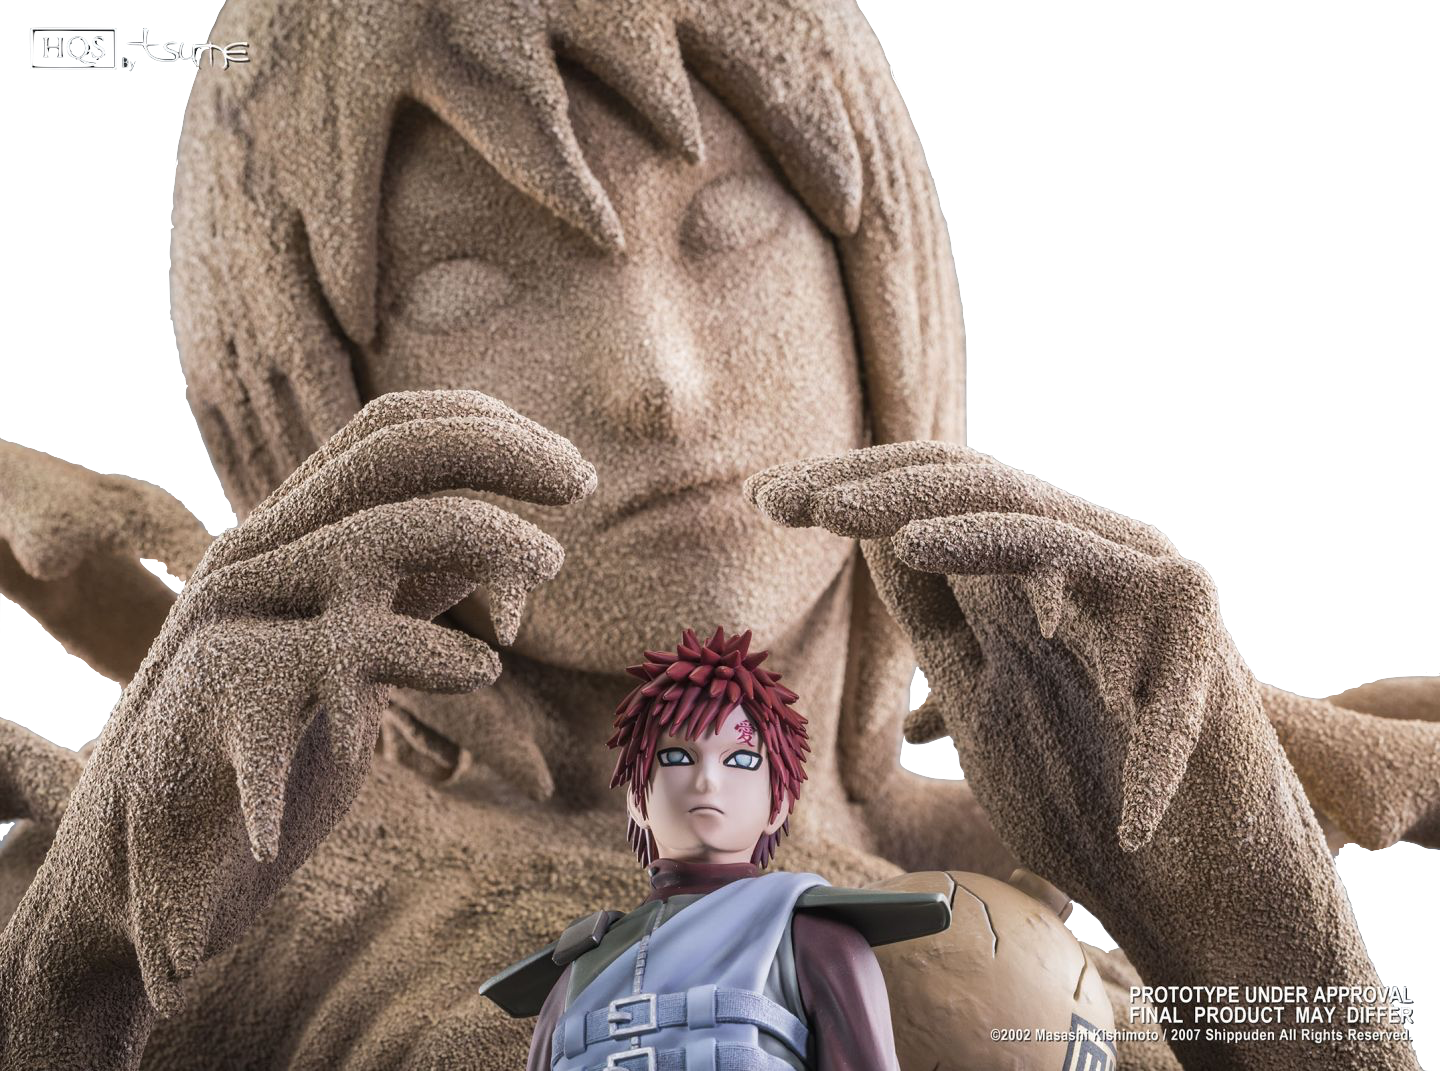 tsume-art-naruto-shippuden-gaara-a-father's-hope-a-mother's-love-hqs-statue-toyslife